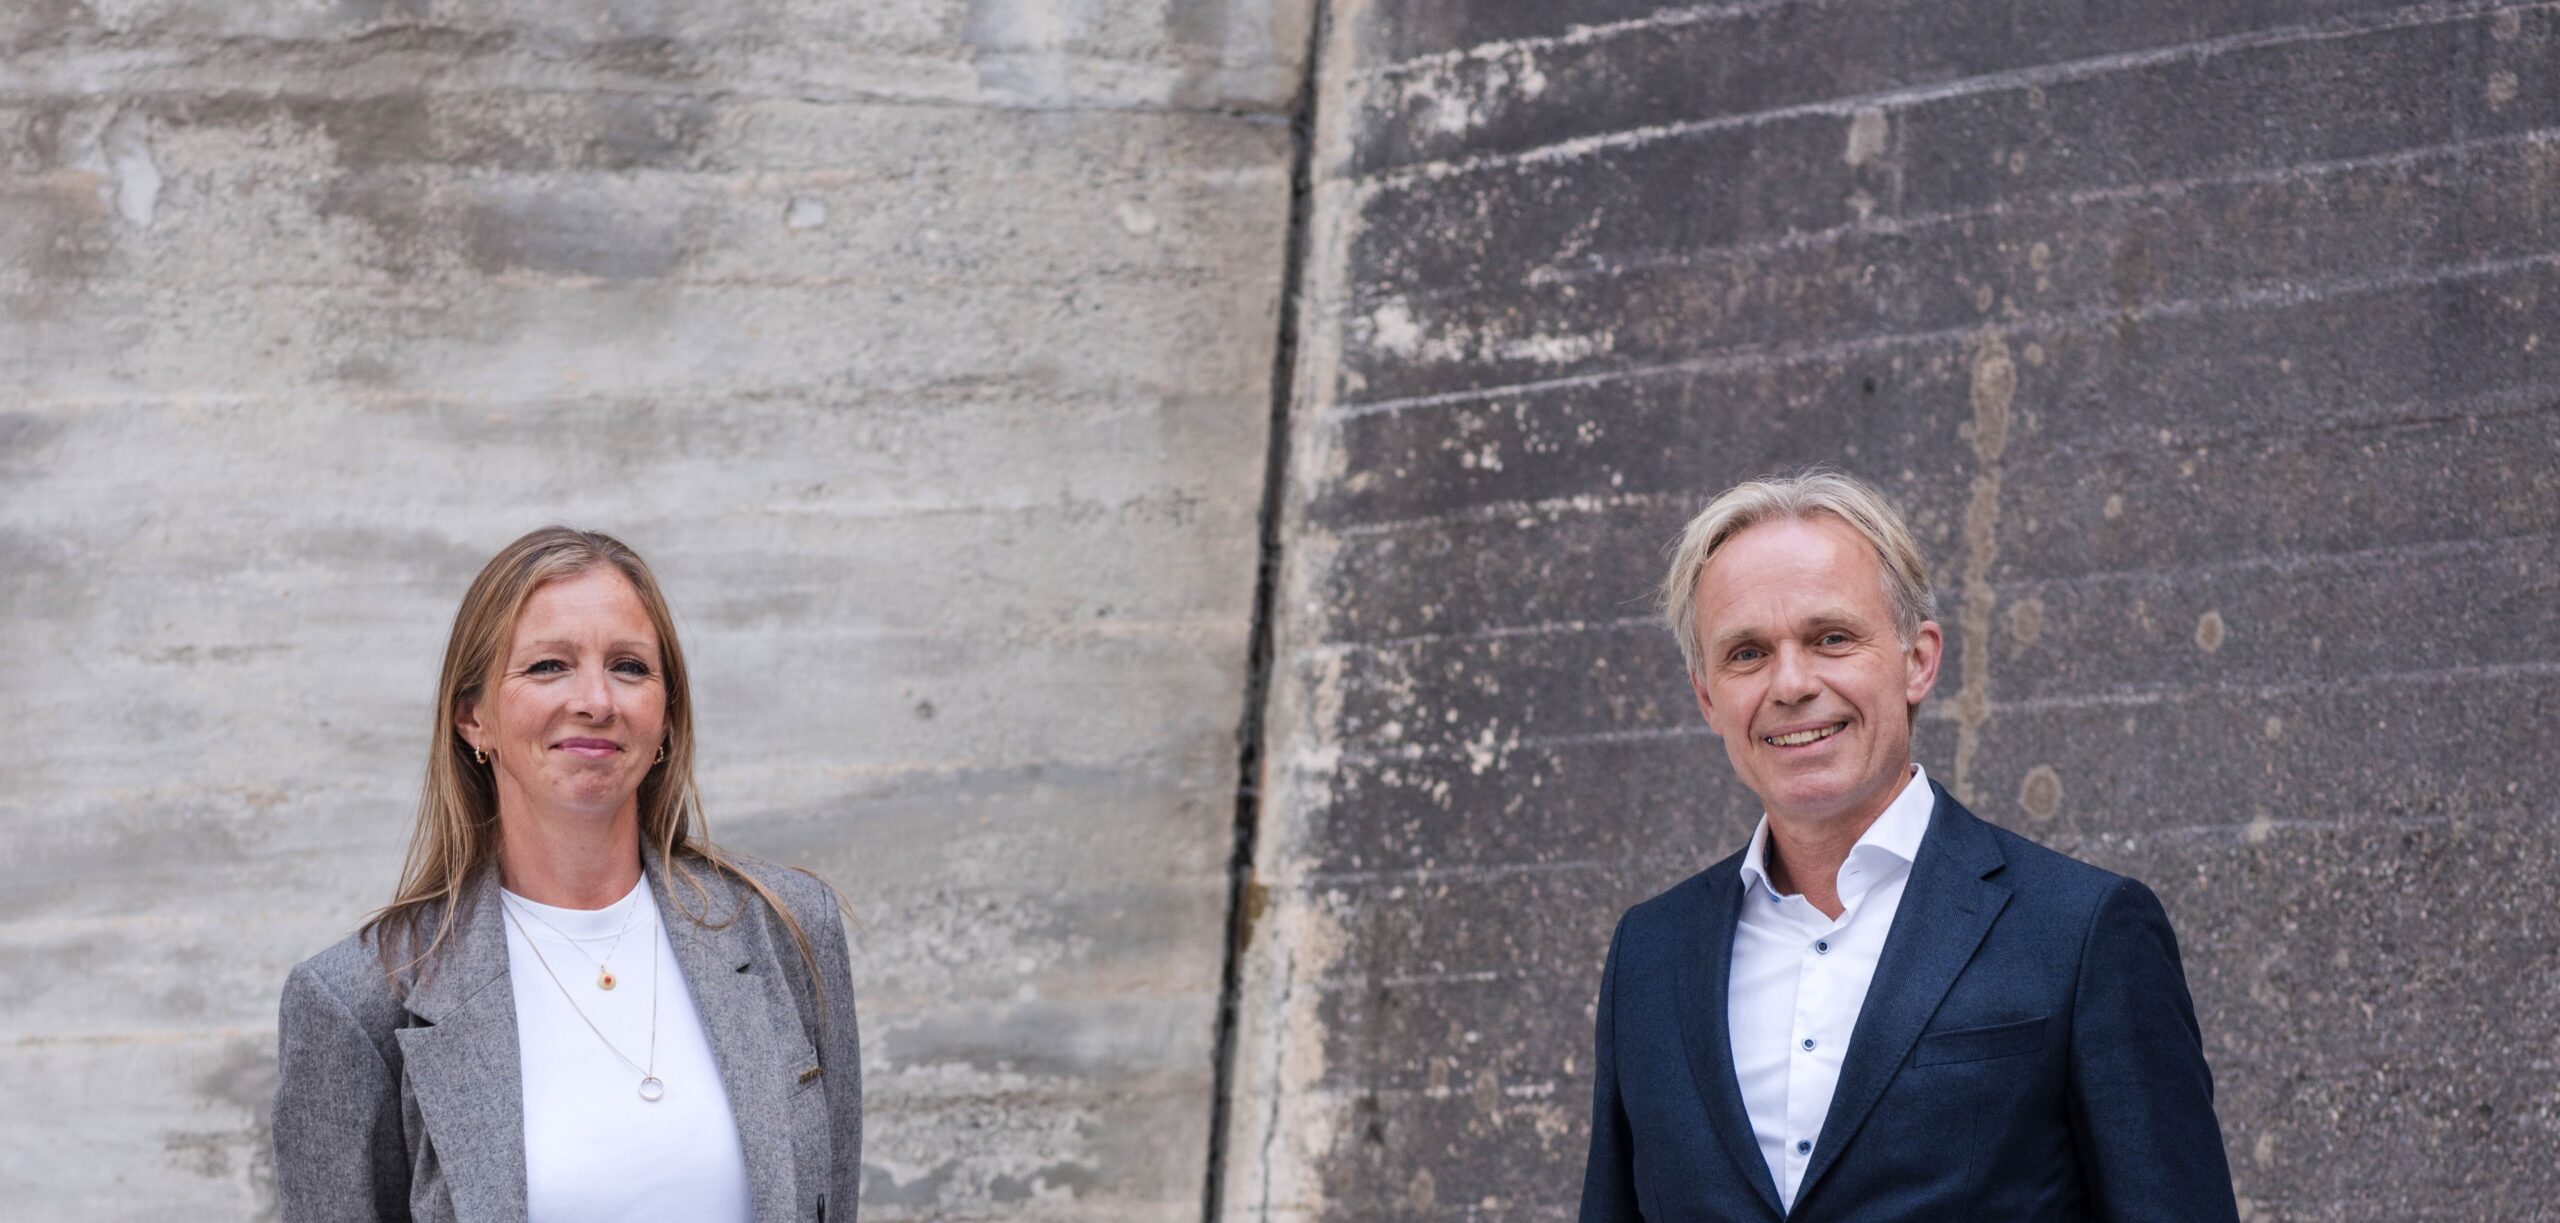 a woman and a man in suits standing next to each other in front of a concrete wall